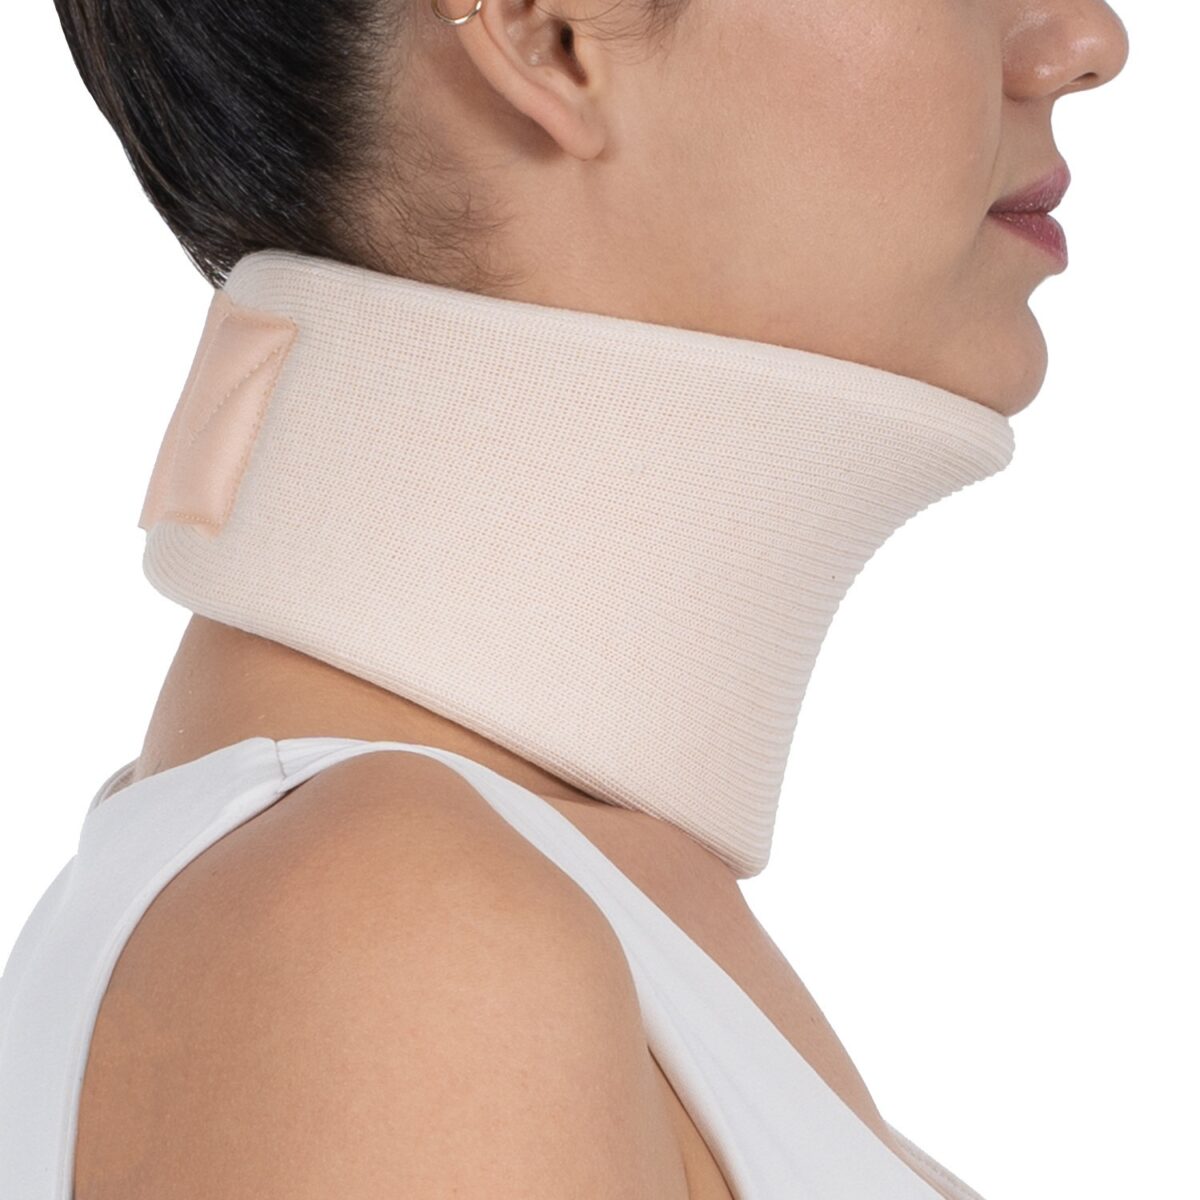 wingmed orthopedic equipments W104 nelson collar fabric coated product 2 1